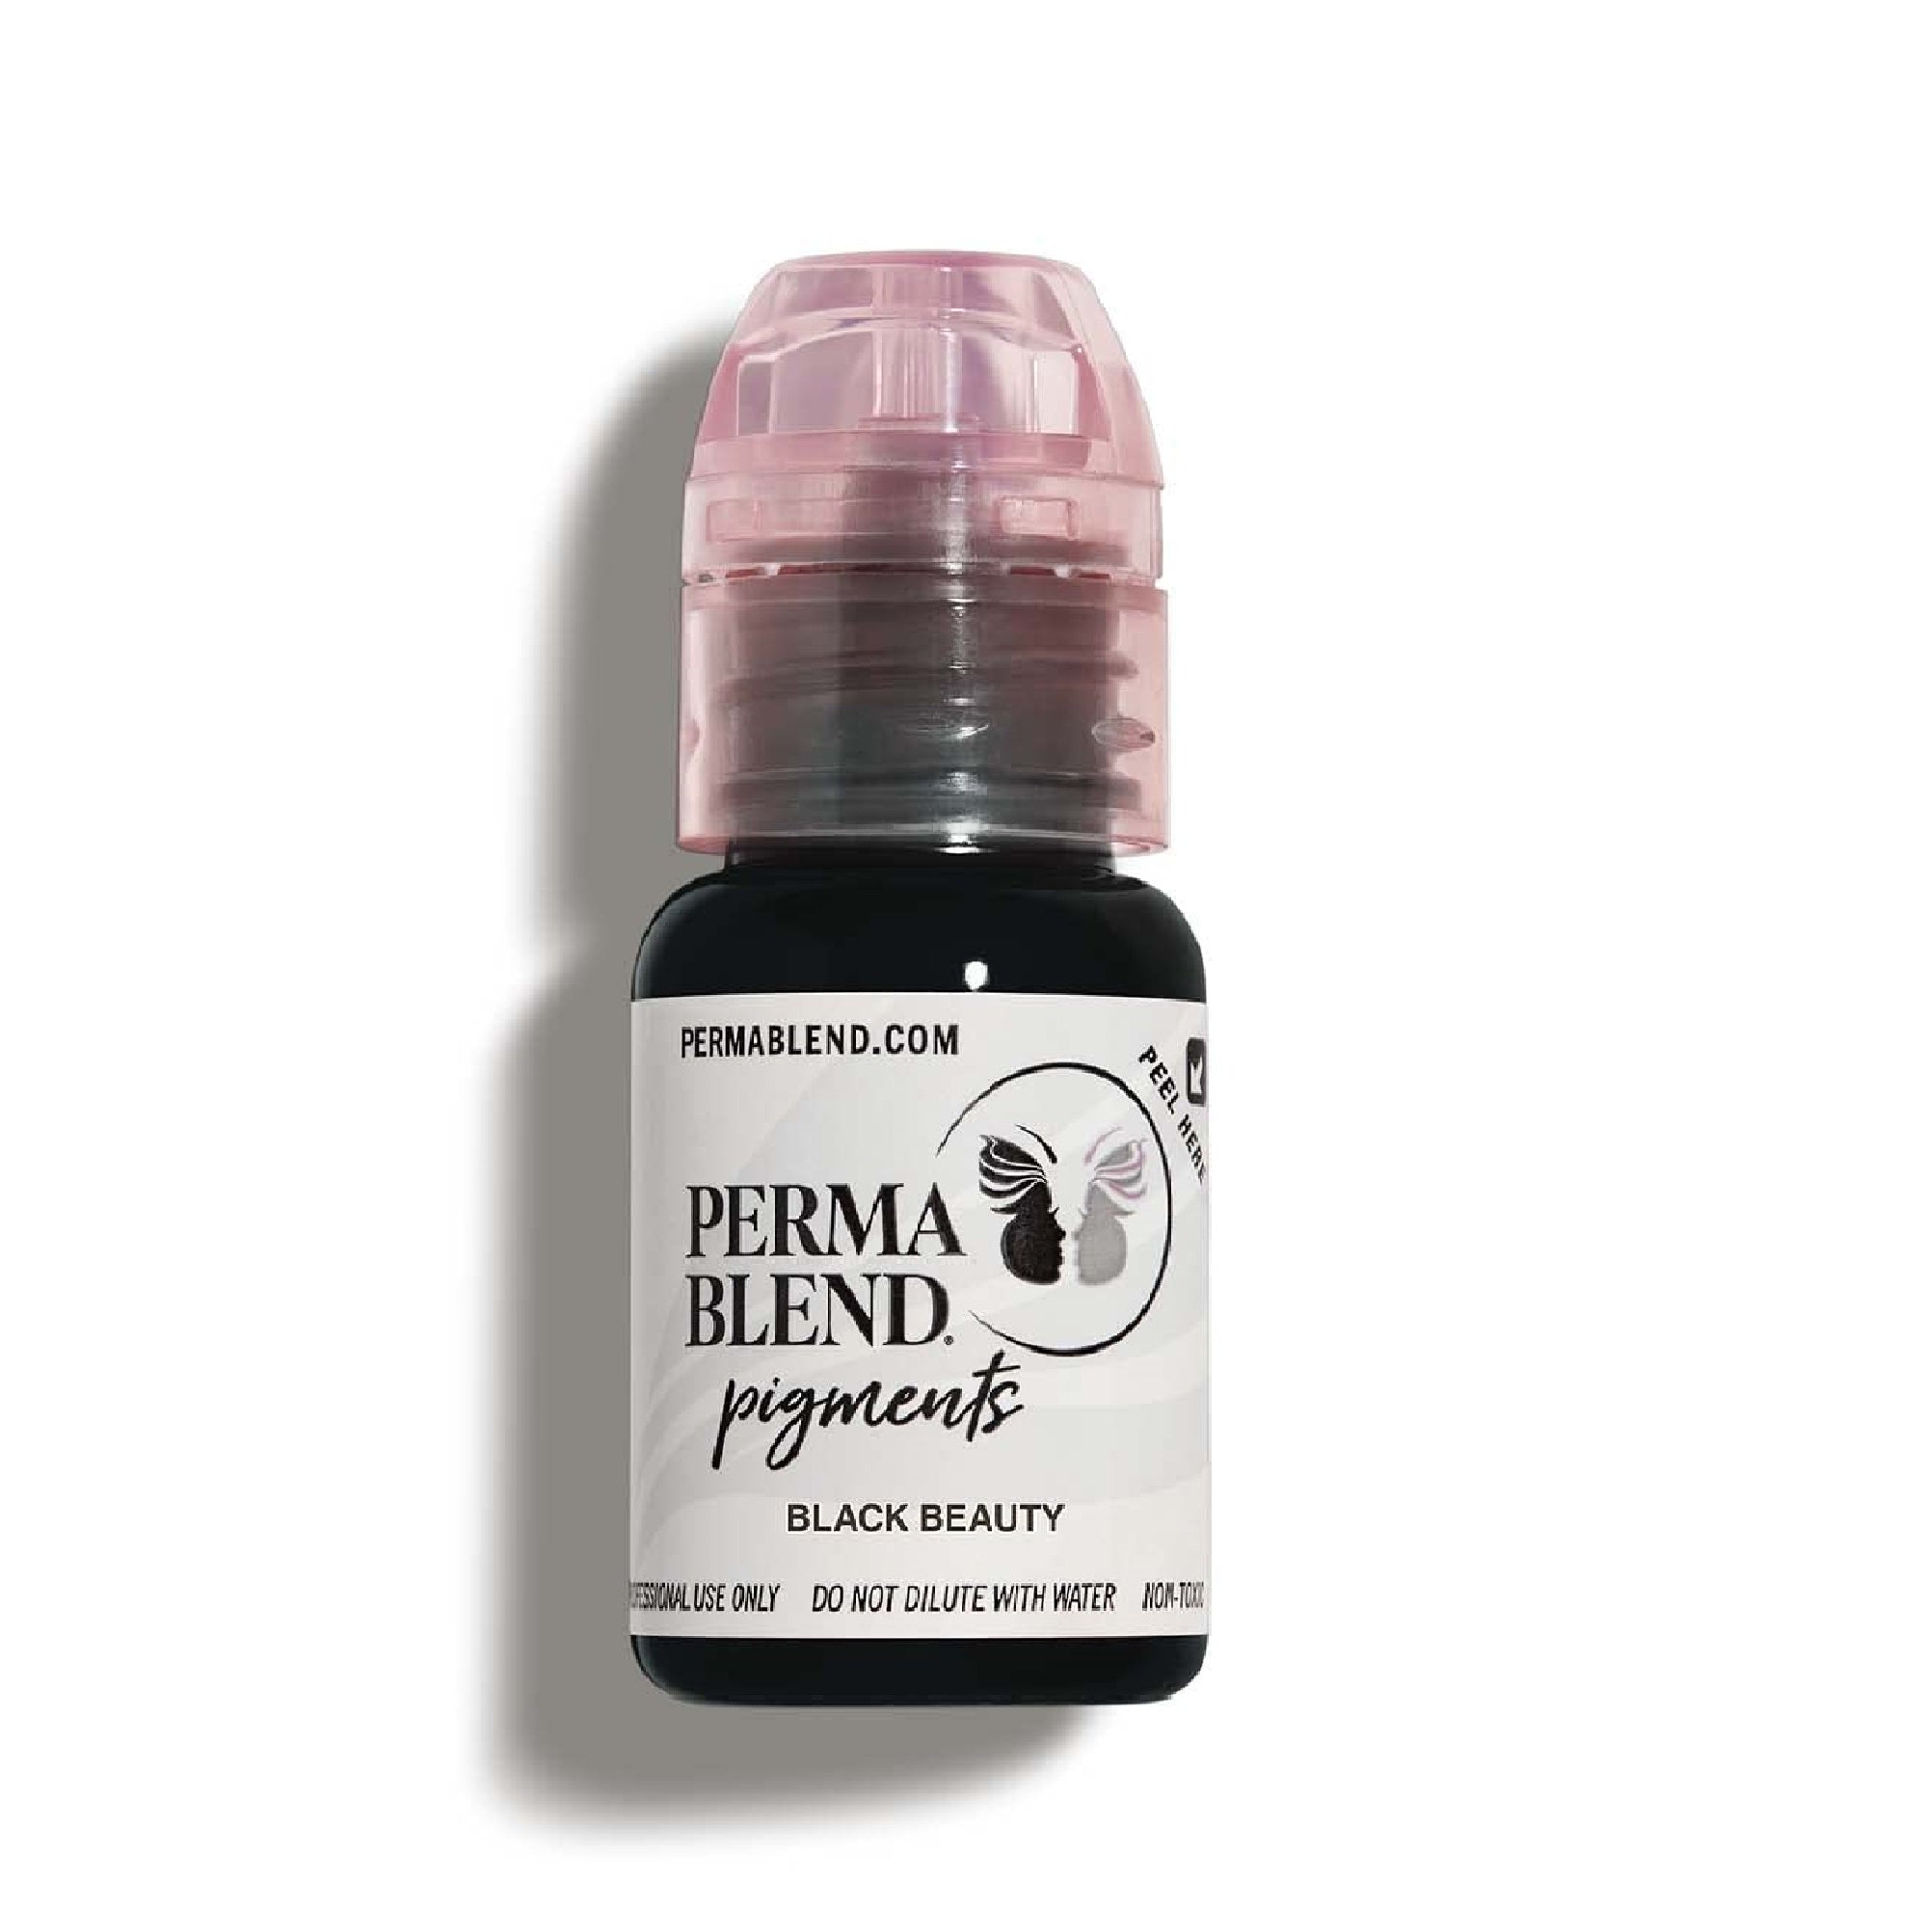 Black Beauty, eyeliner pigment for permament makeup by Perma Blend